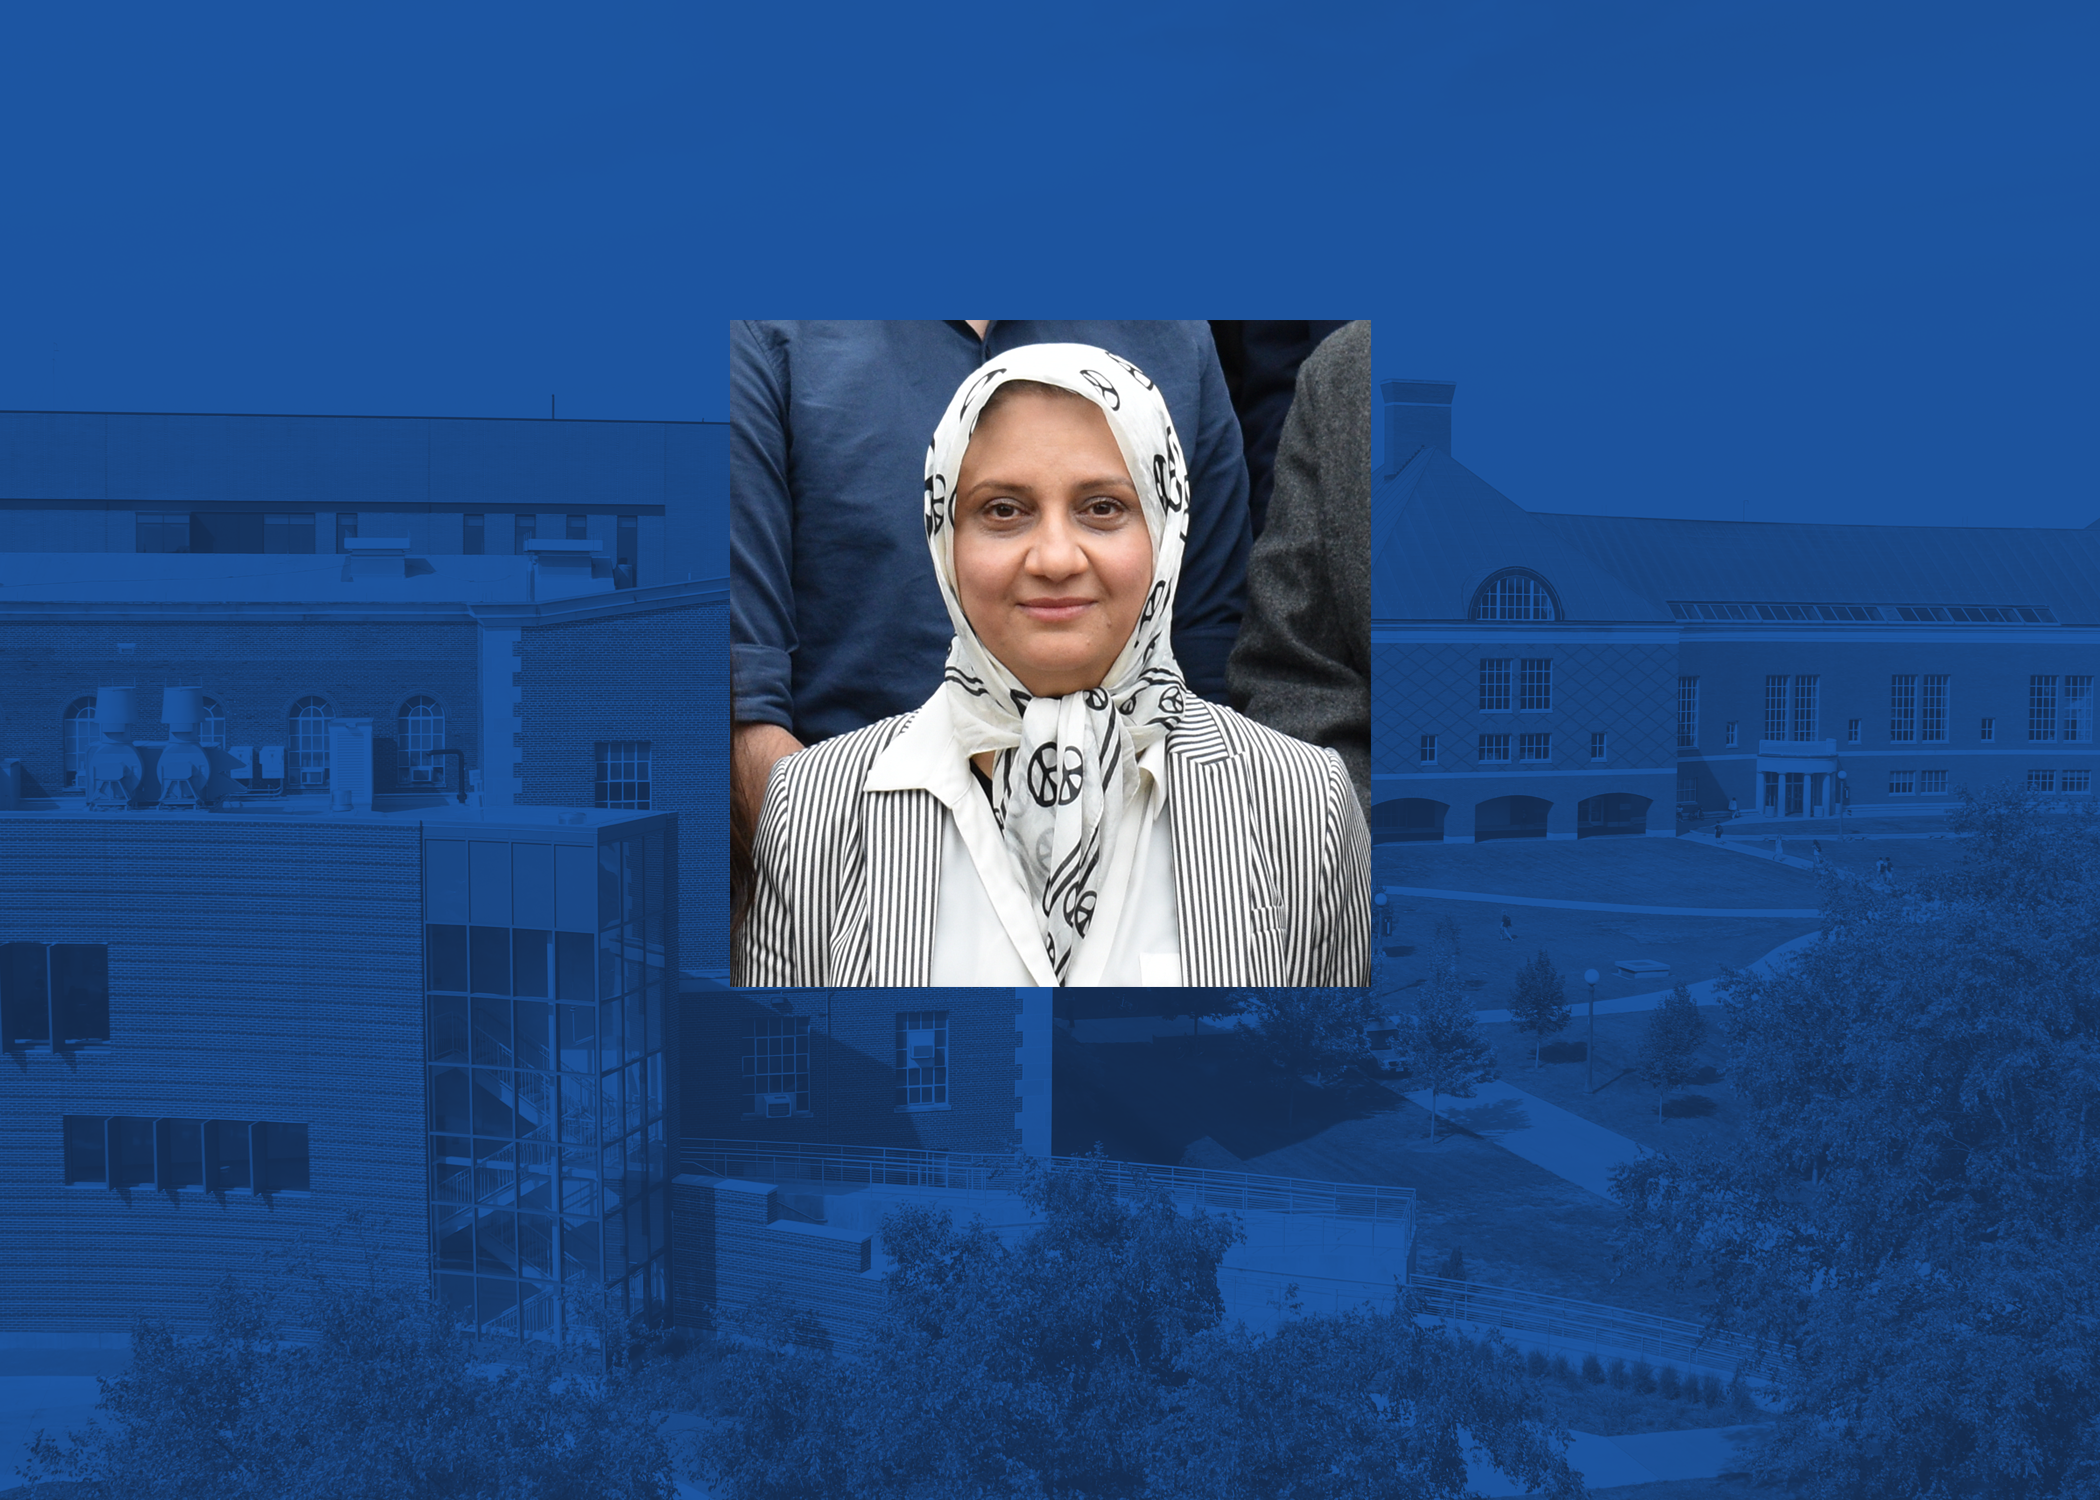 Mohaghegh to give lecture in Women in Science series